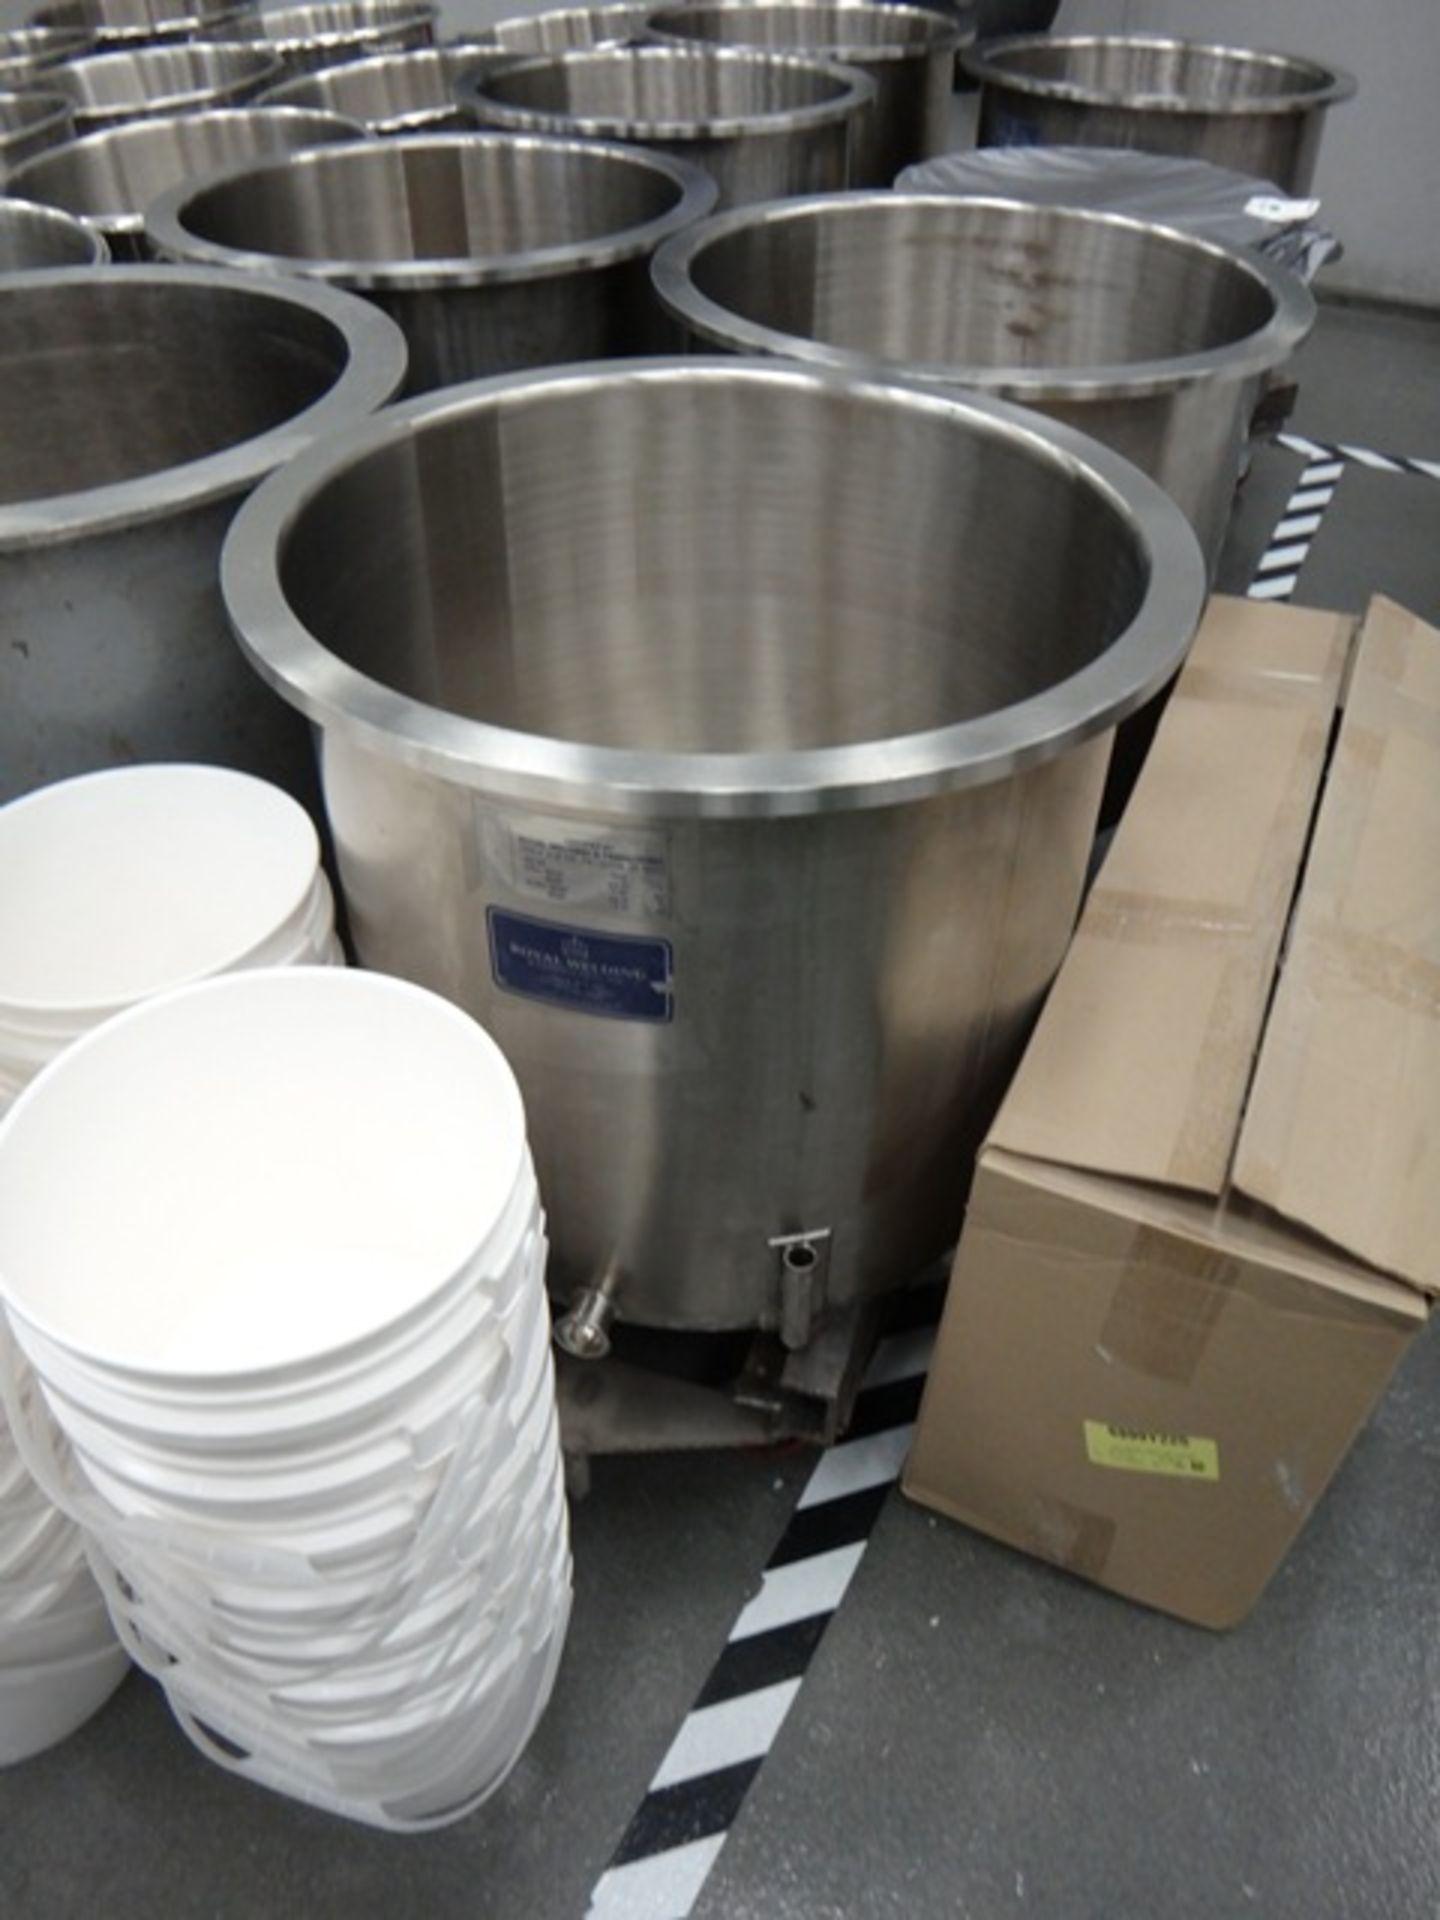 40 Gallon Deep Stainless Steel Mixing Can (25'' x 22'') - From Ross Mixer - Image 2 of 2